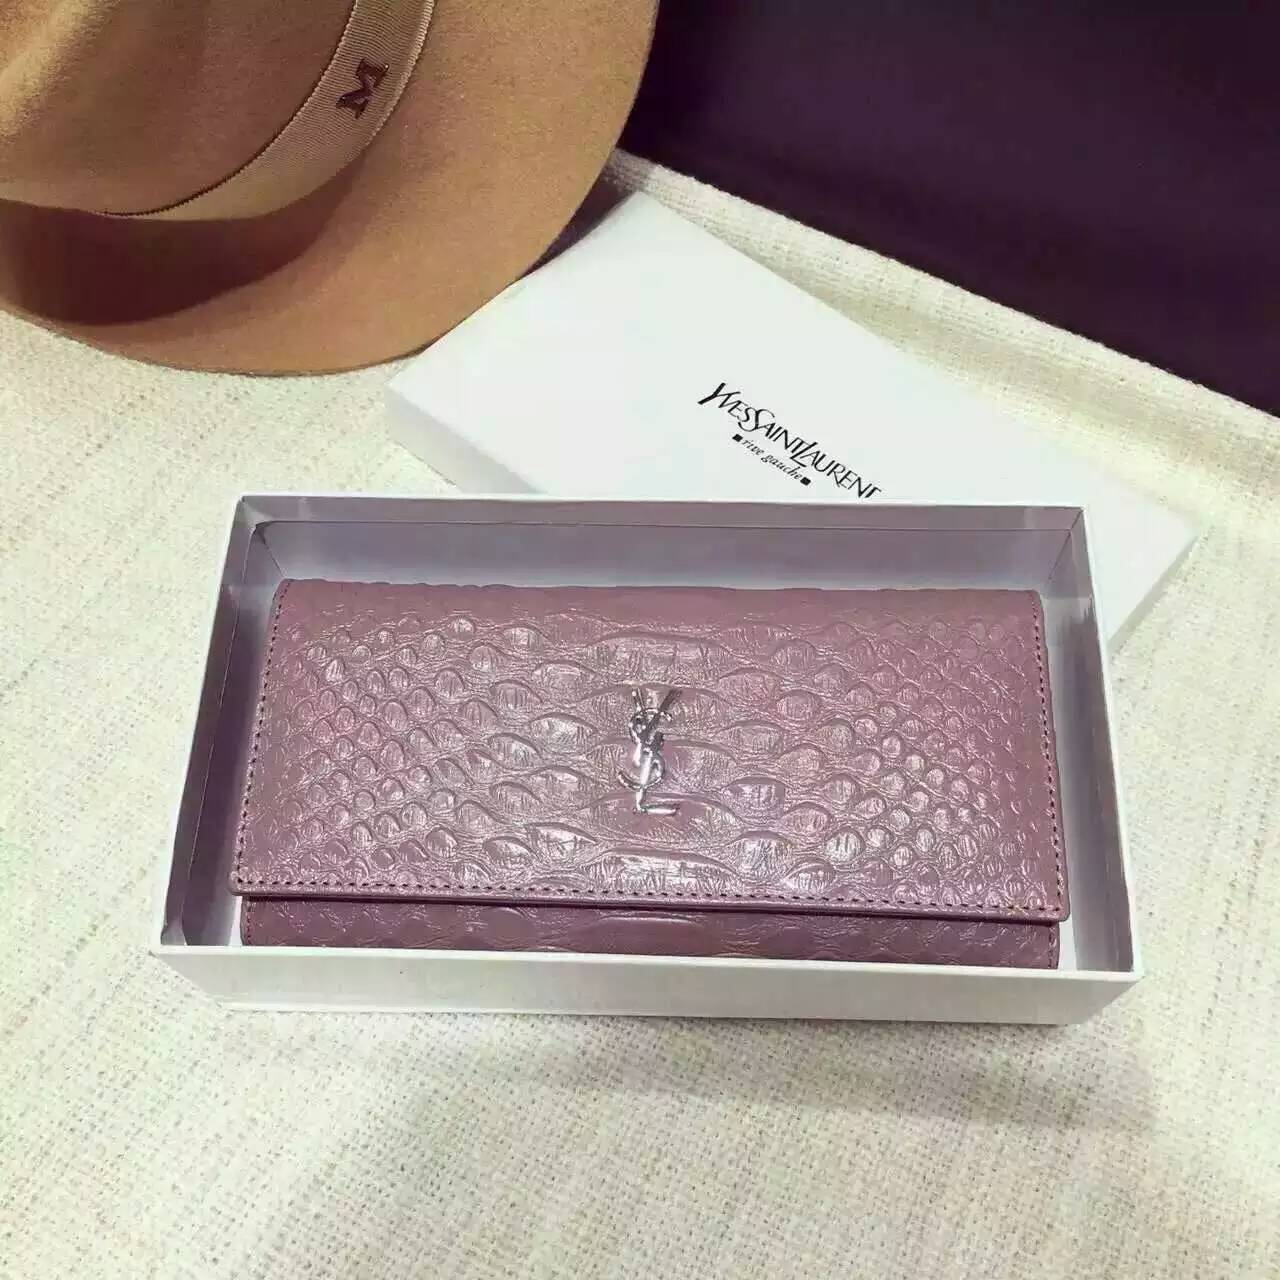 Limited Edition!2016 New Saint Laurent Small Leather Goods Cheap Sale-Saint Laurent Clutch in Pink Python Embossed Leather